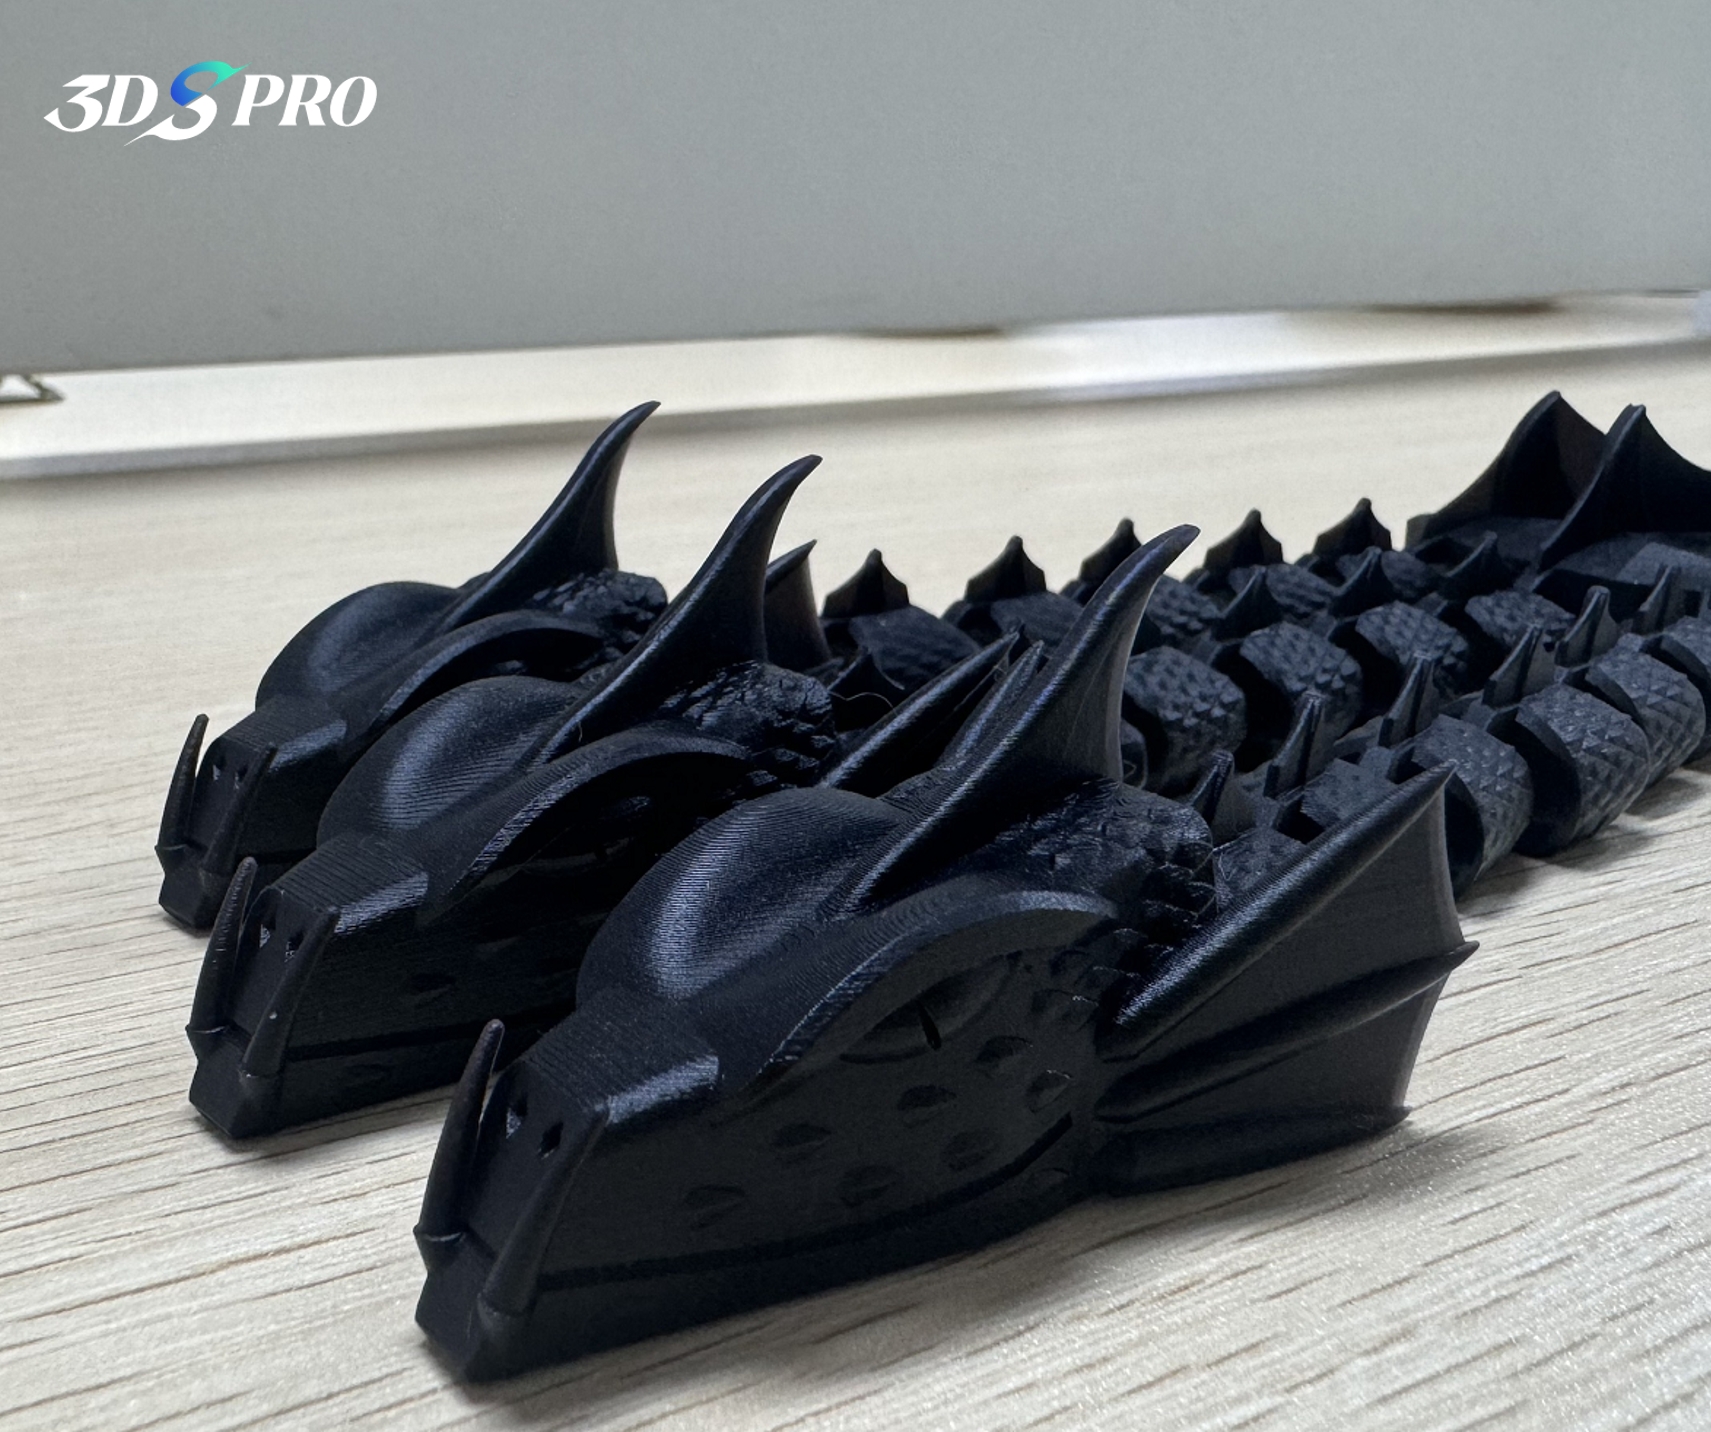 3DSPRO SLA 3D Printed Print-in-Place Articulated Dragon